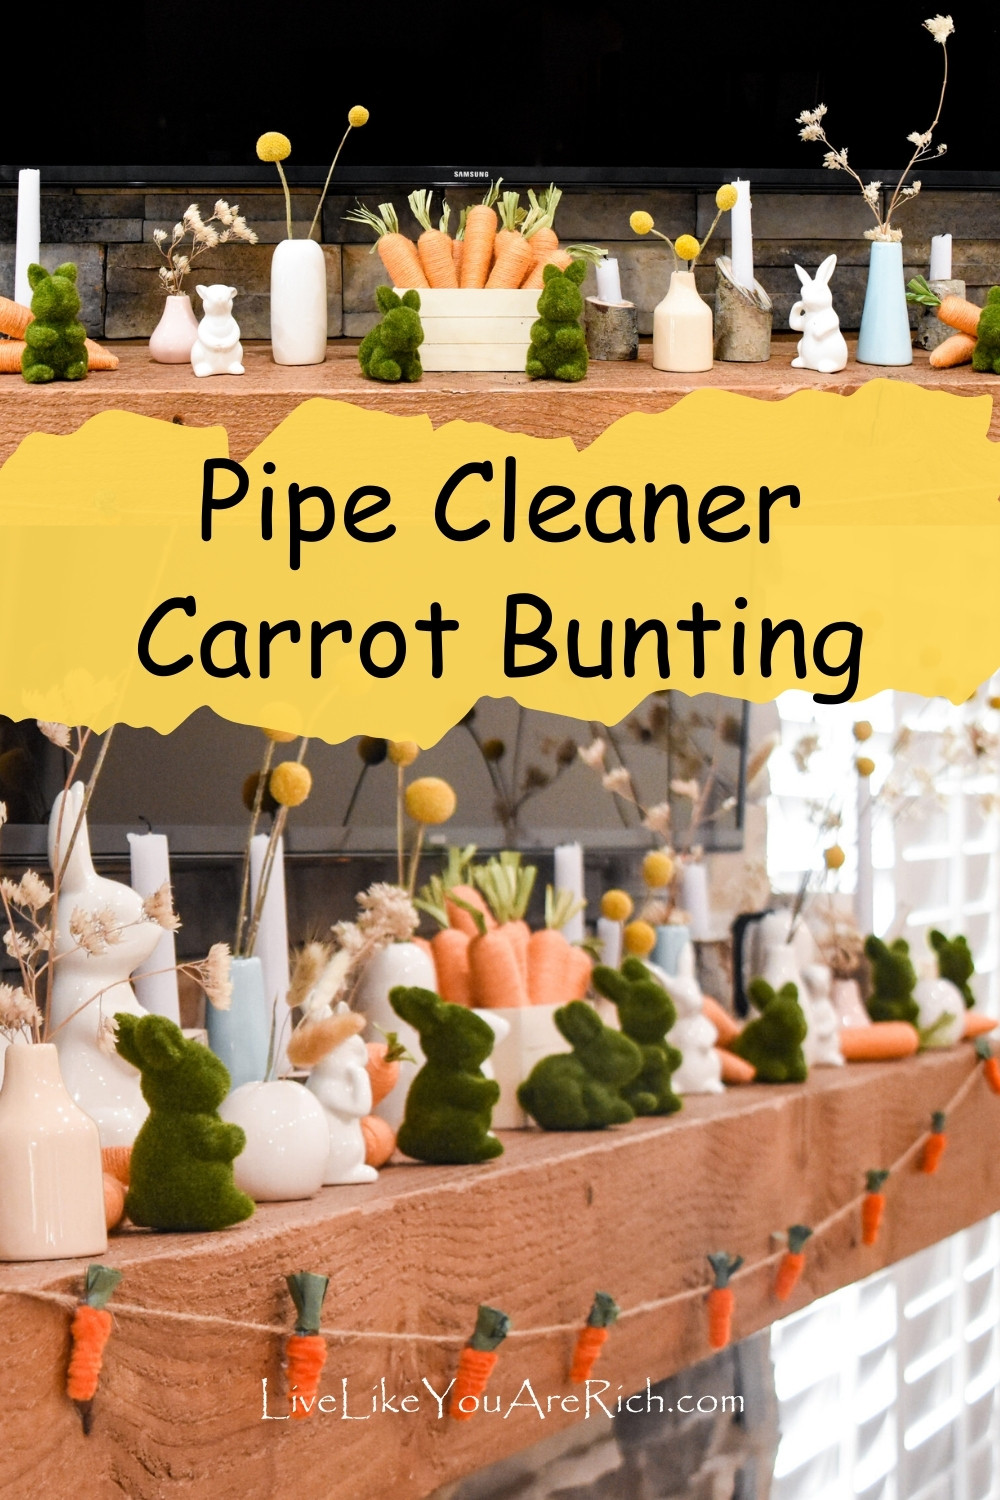 Pipe Cleaner Carrot Bunting